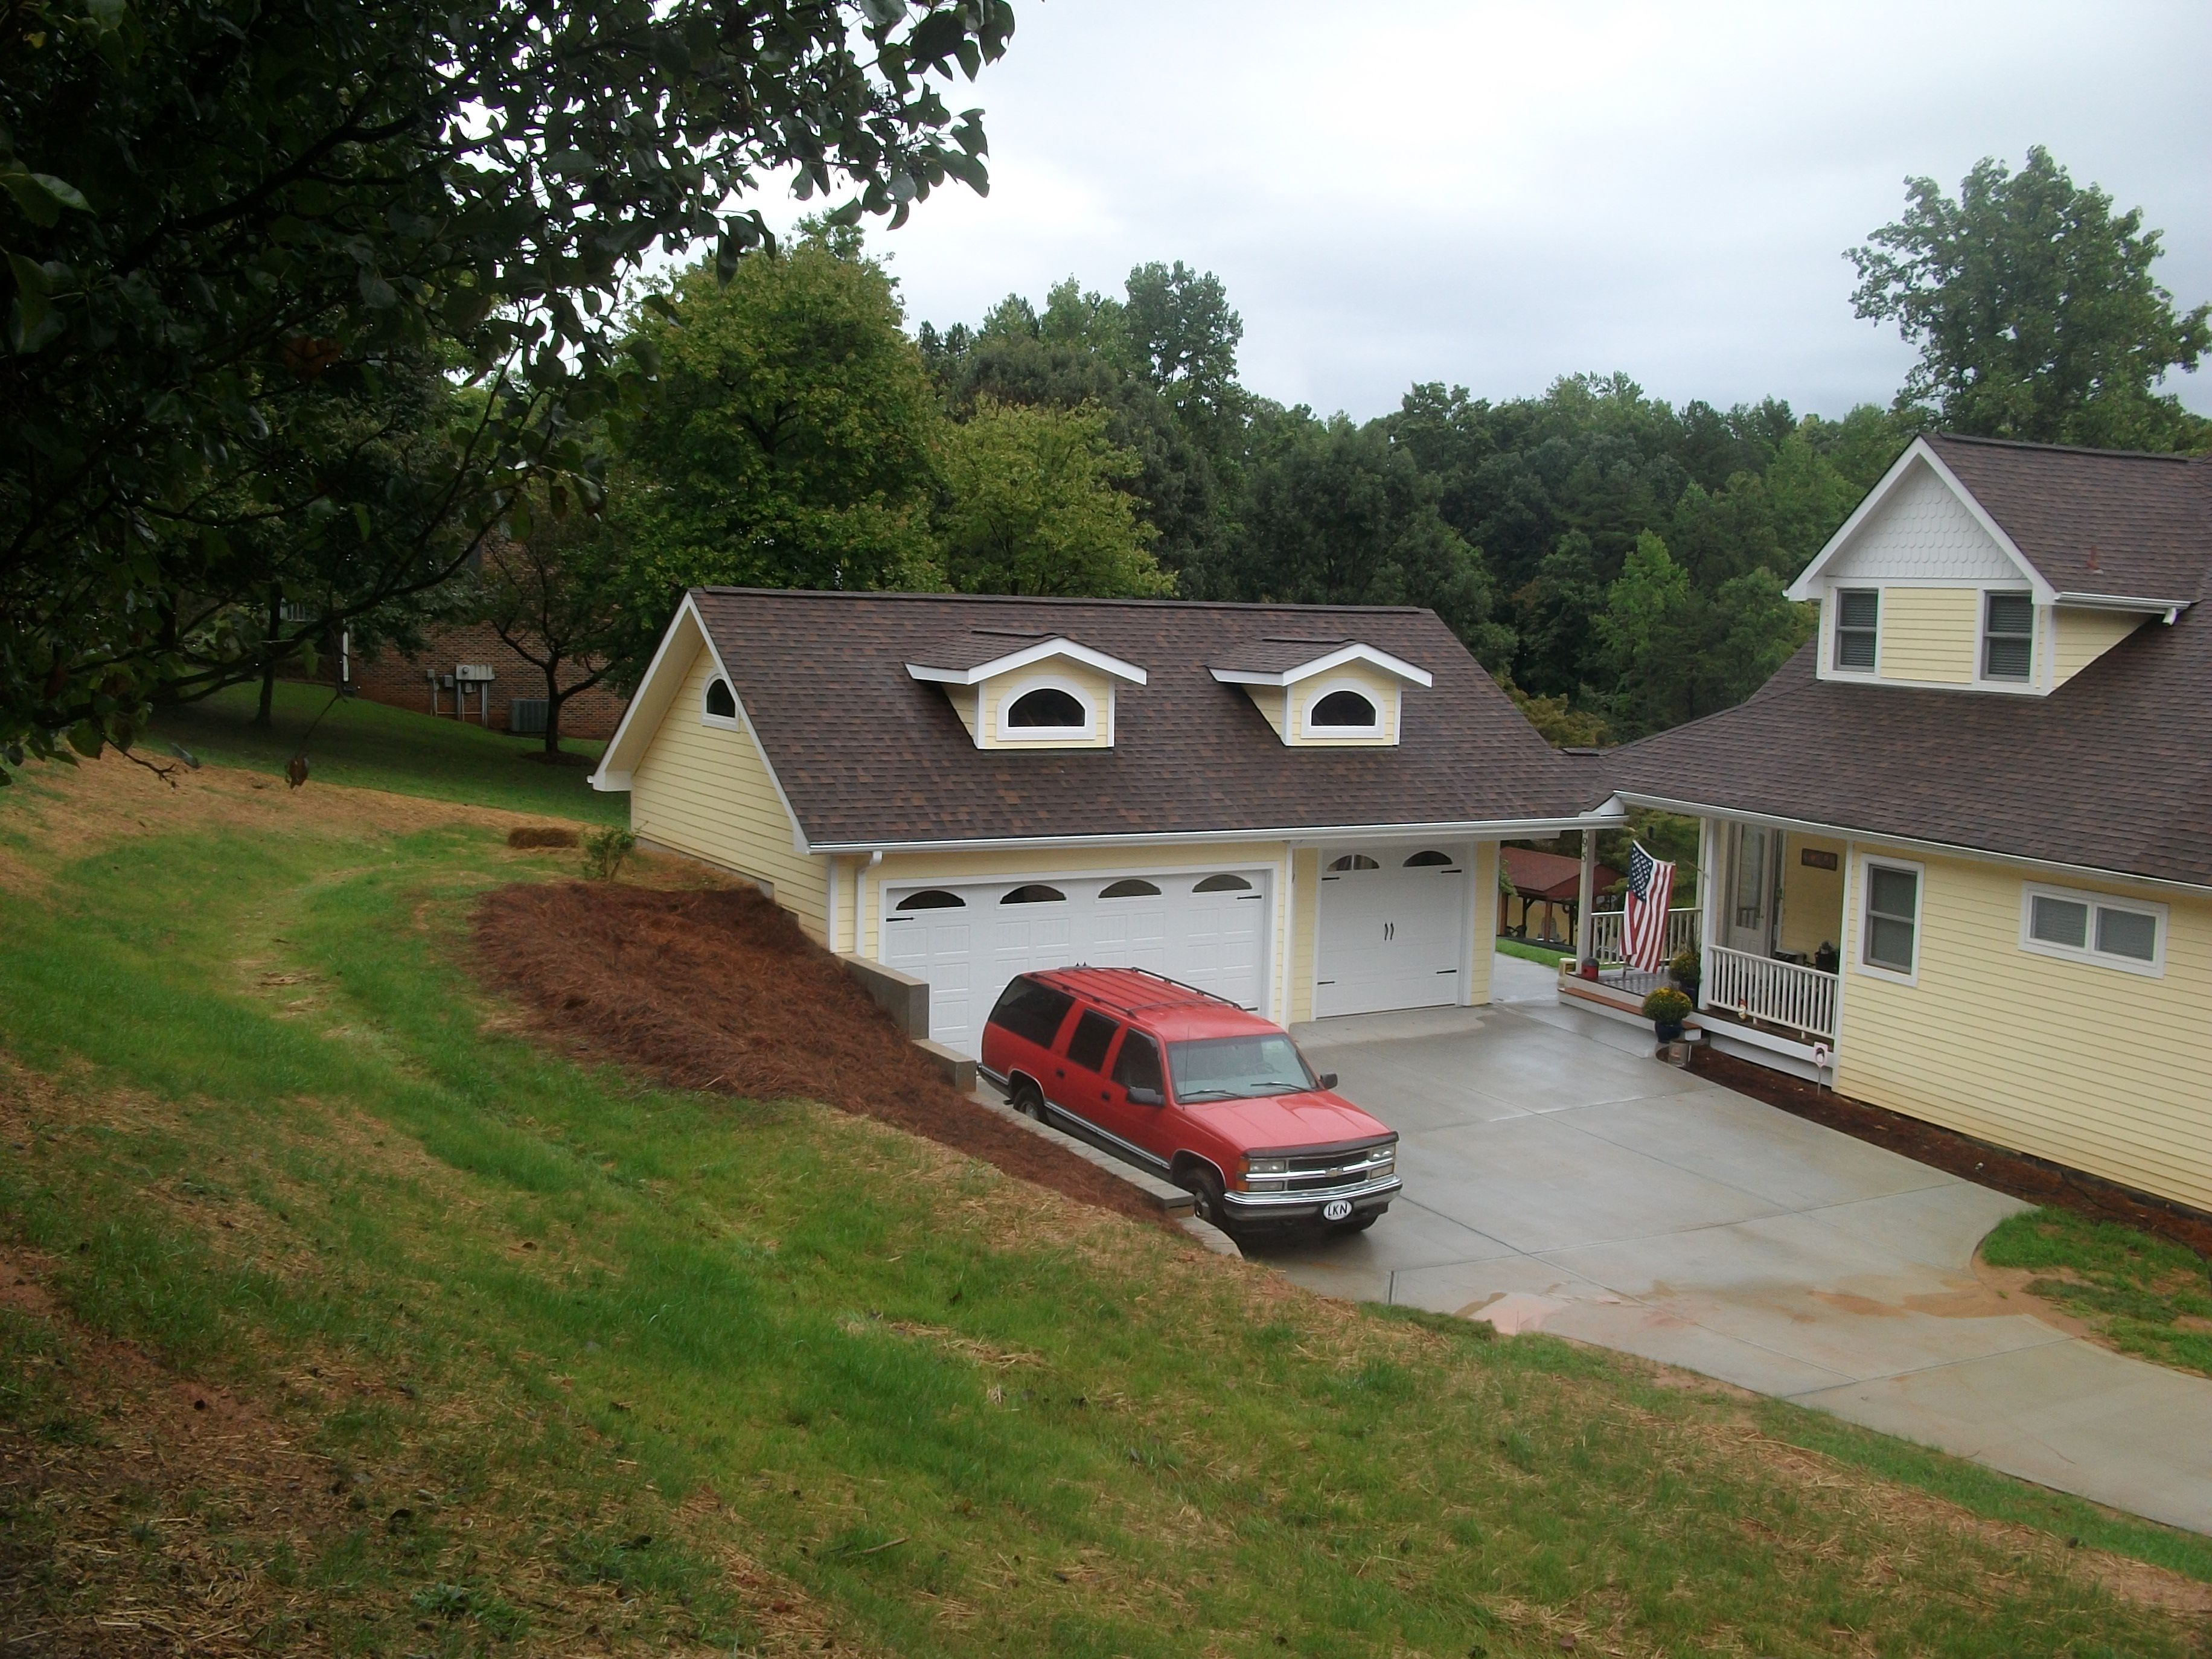 Projects Built As Superintendent Over The Years for Merl's Construction LLC in Statesville, NC